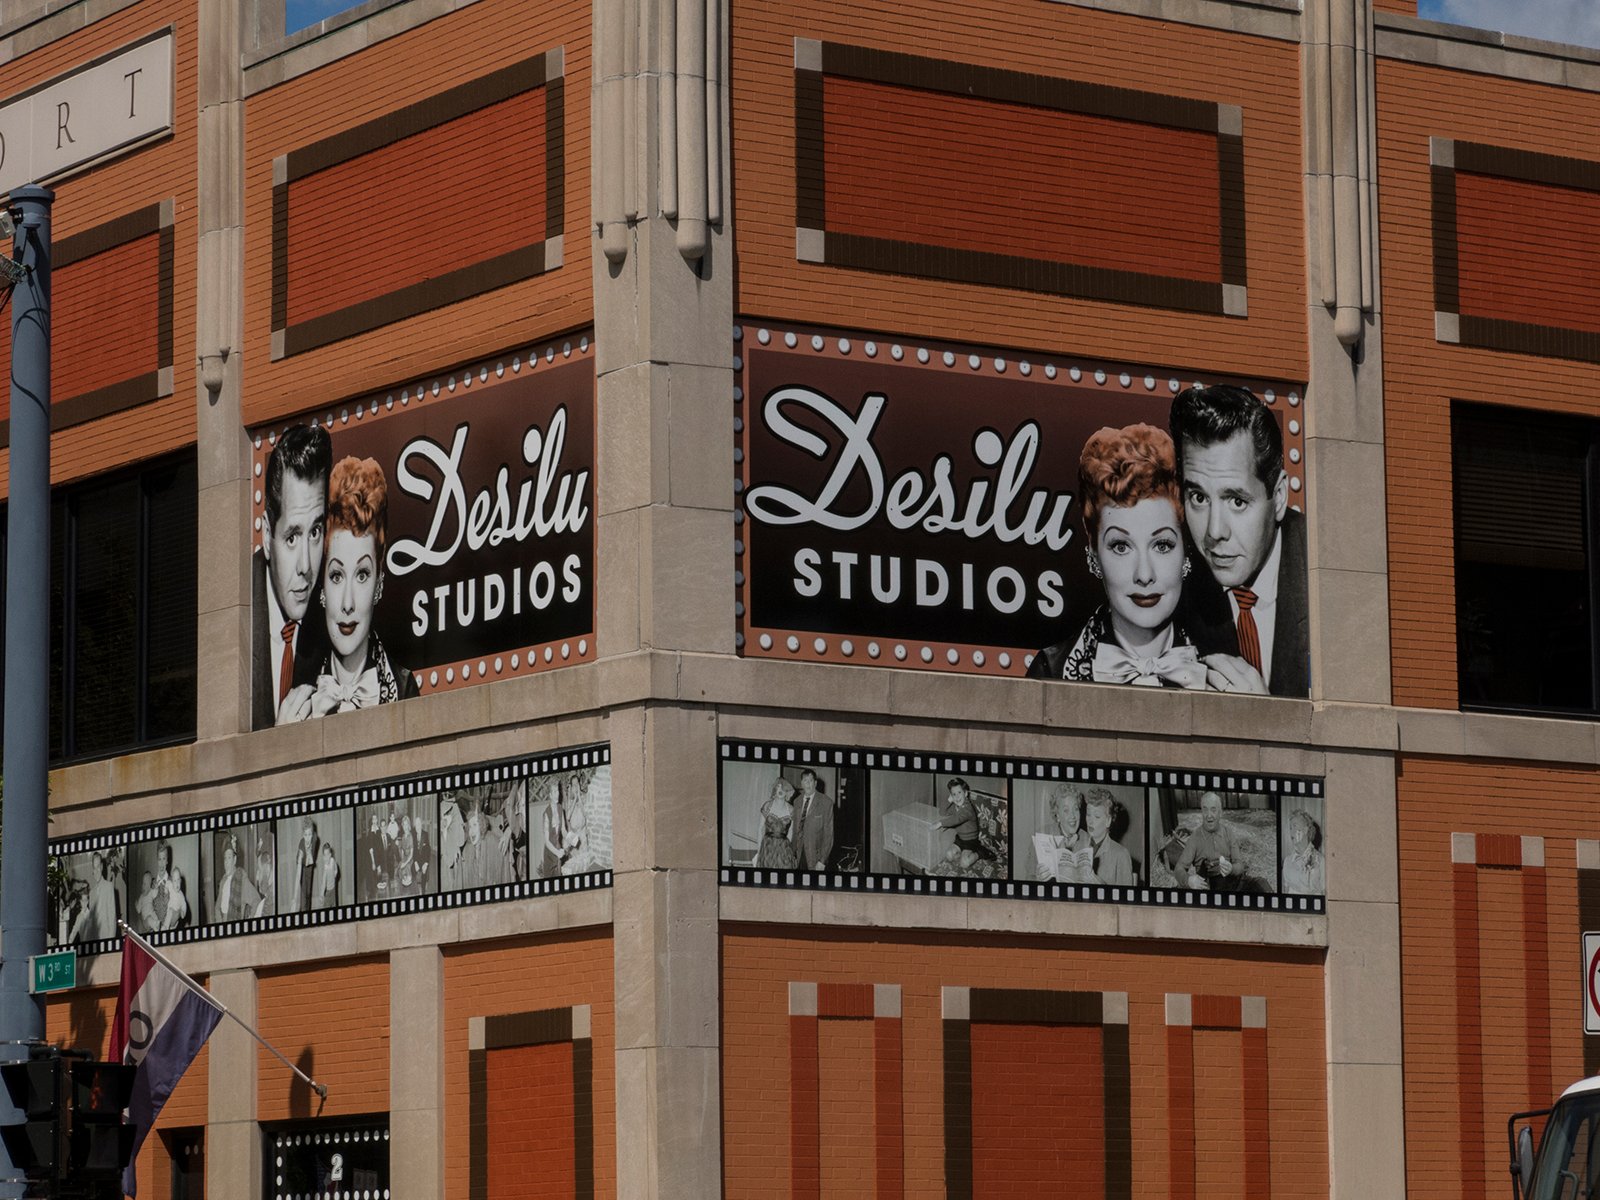 Lucille Ball-Desi Arnaz Museum and More Historical Sights | Visit Western NY  - The Chautauqua-Allegheny Region of New York State